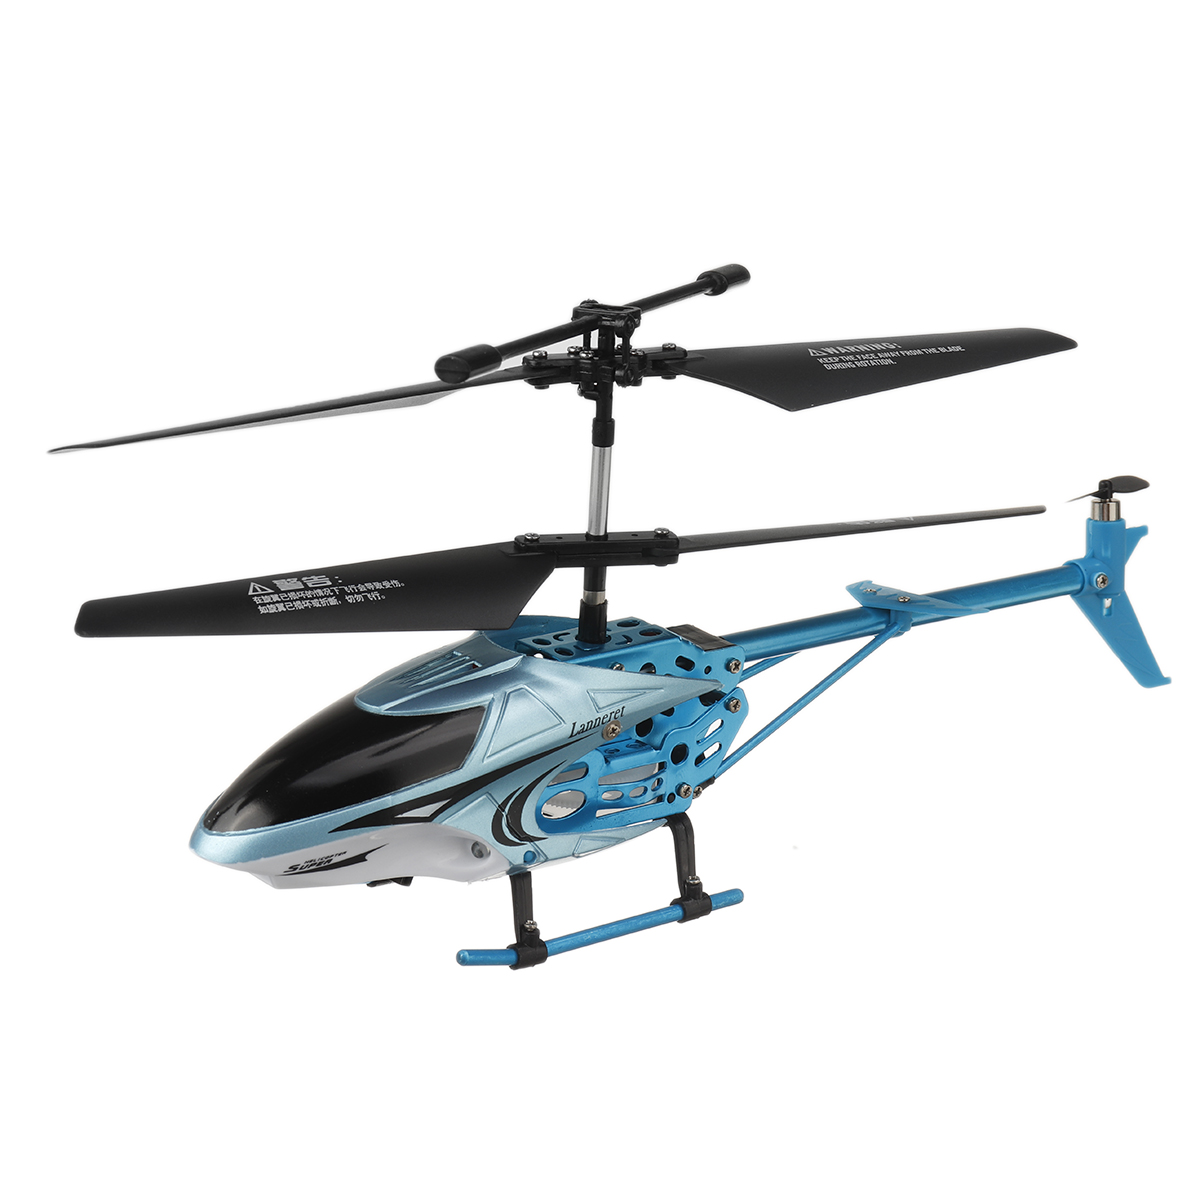 35CH-Alloy-Fall-Resistant-USB-Charging-Lock-tail-Gyroscope-Remote-Control-Helicopter-1846822-7